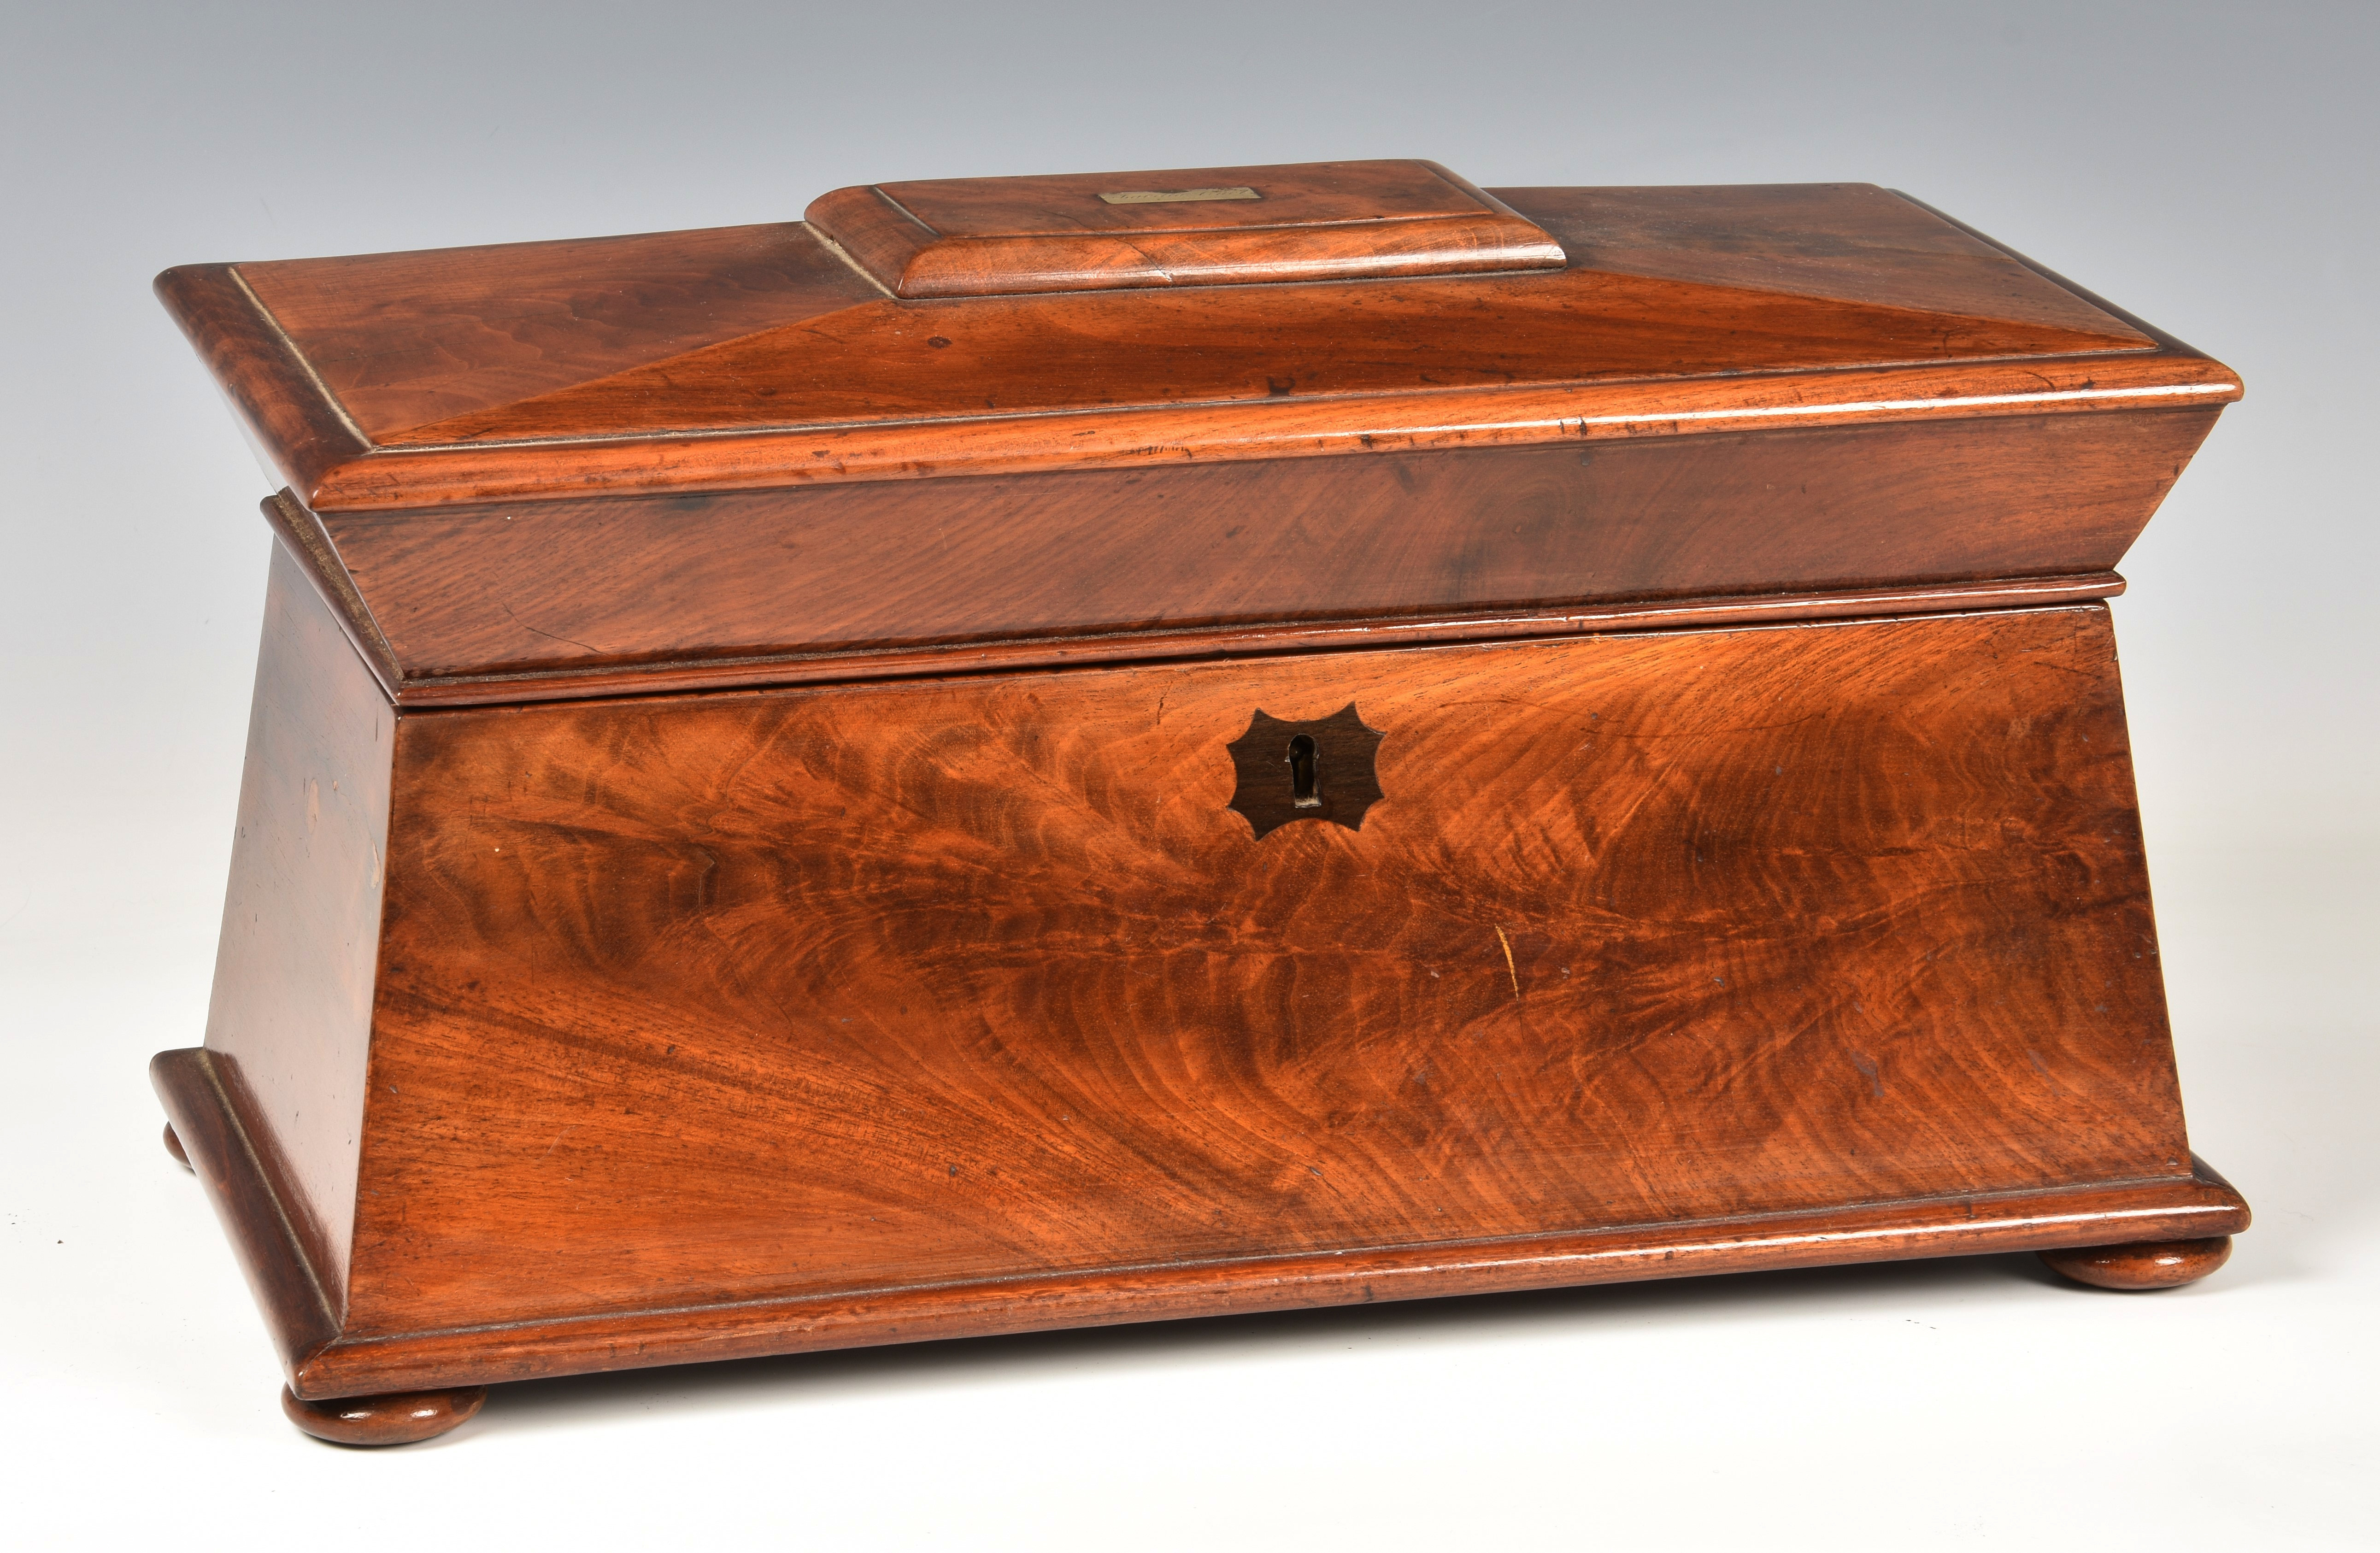 A mid-19th century mahogany tea caddy, of sarcophagus form, with VR lock plate and inlaid